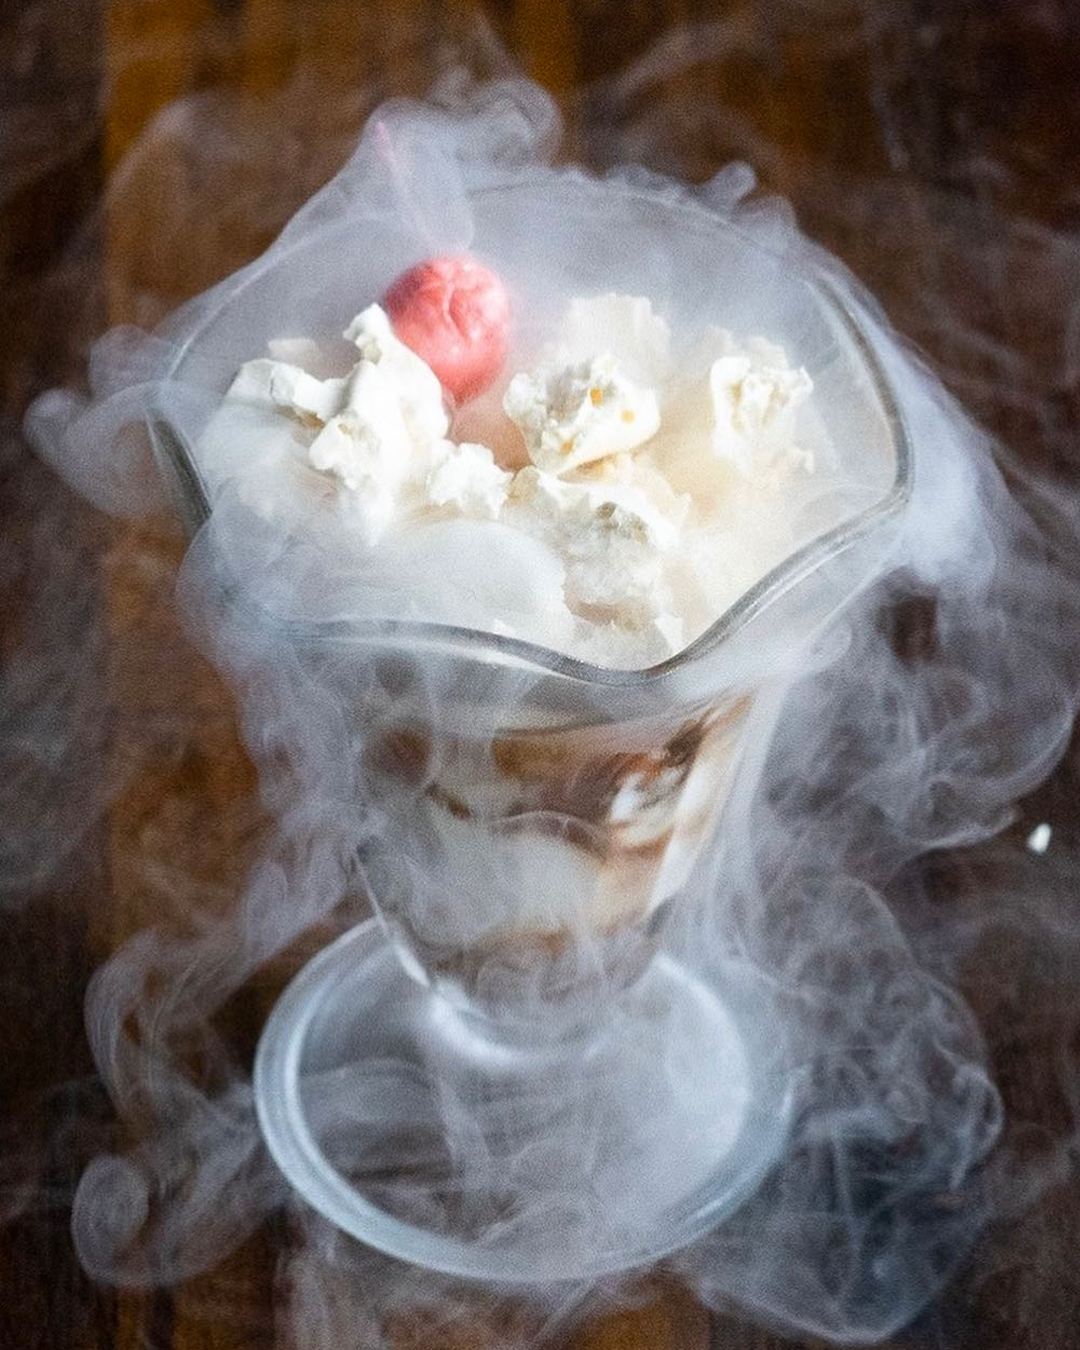 a smokey goblet filled with ice cream